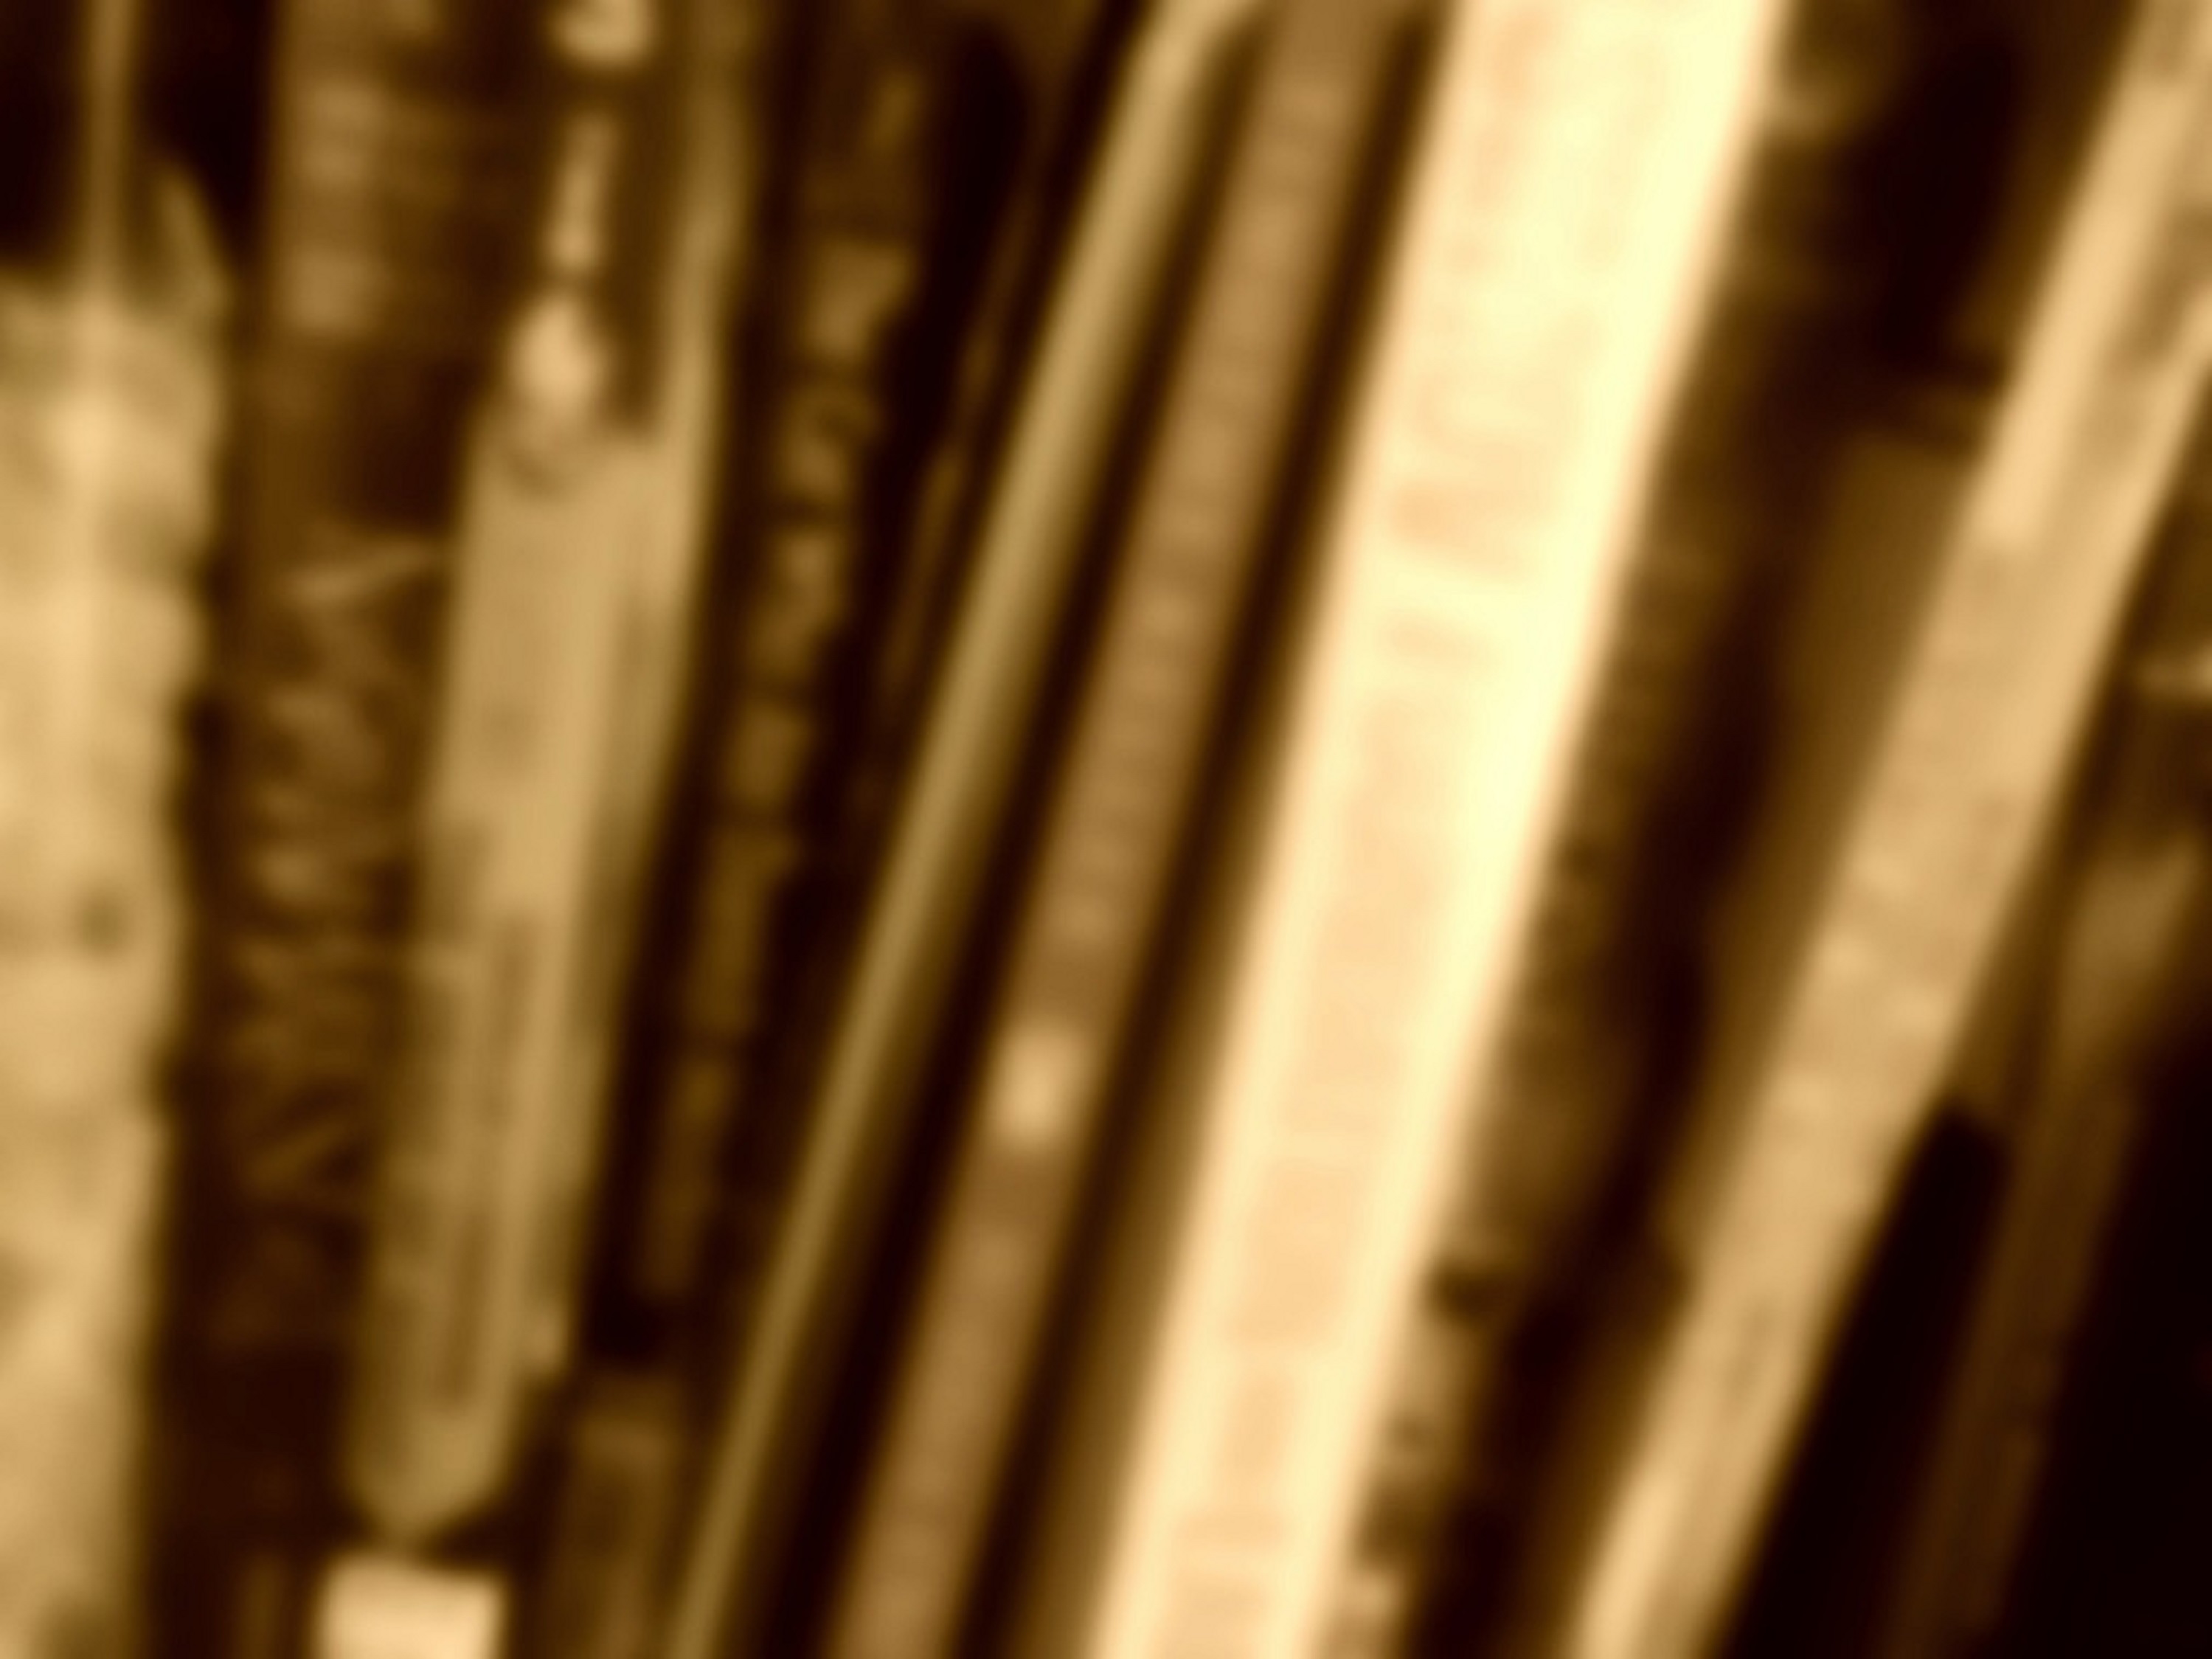 Photo I took of books on my shelf with Old fashioned type effect on LunaPic.com